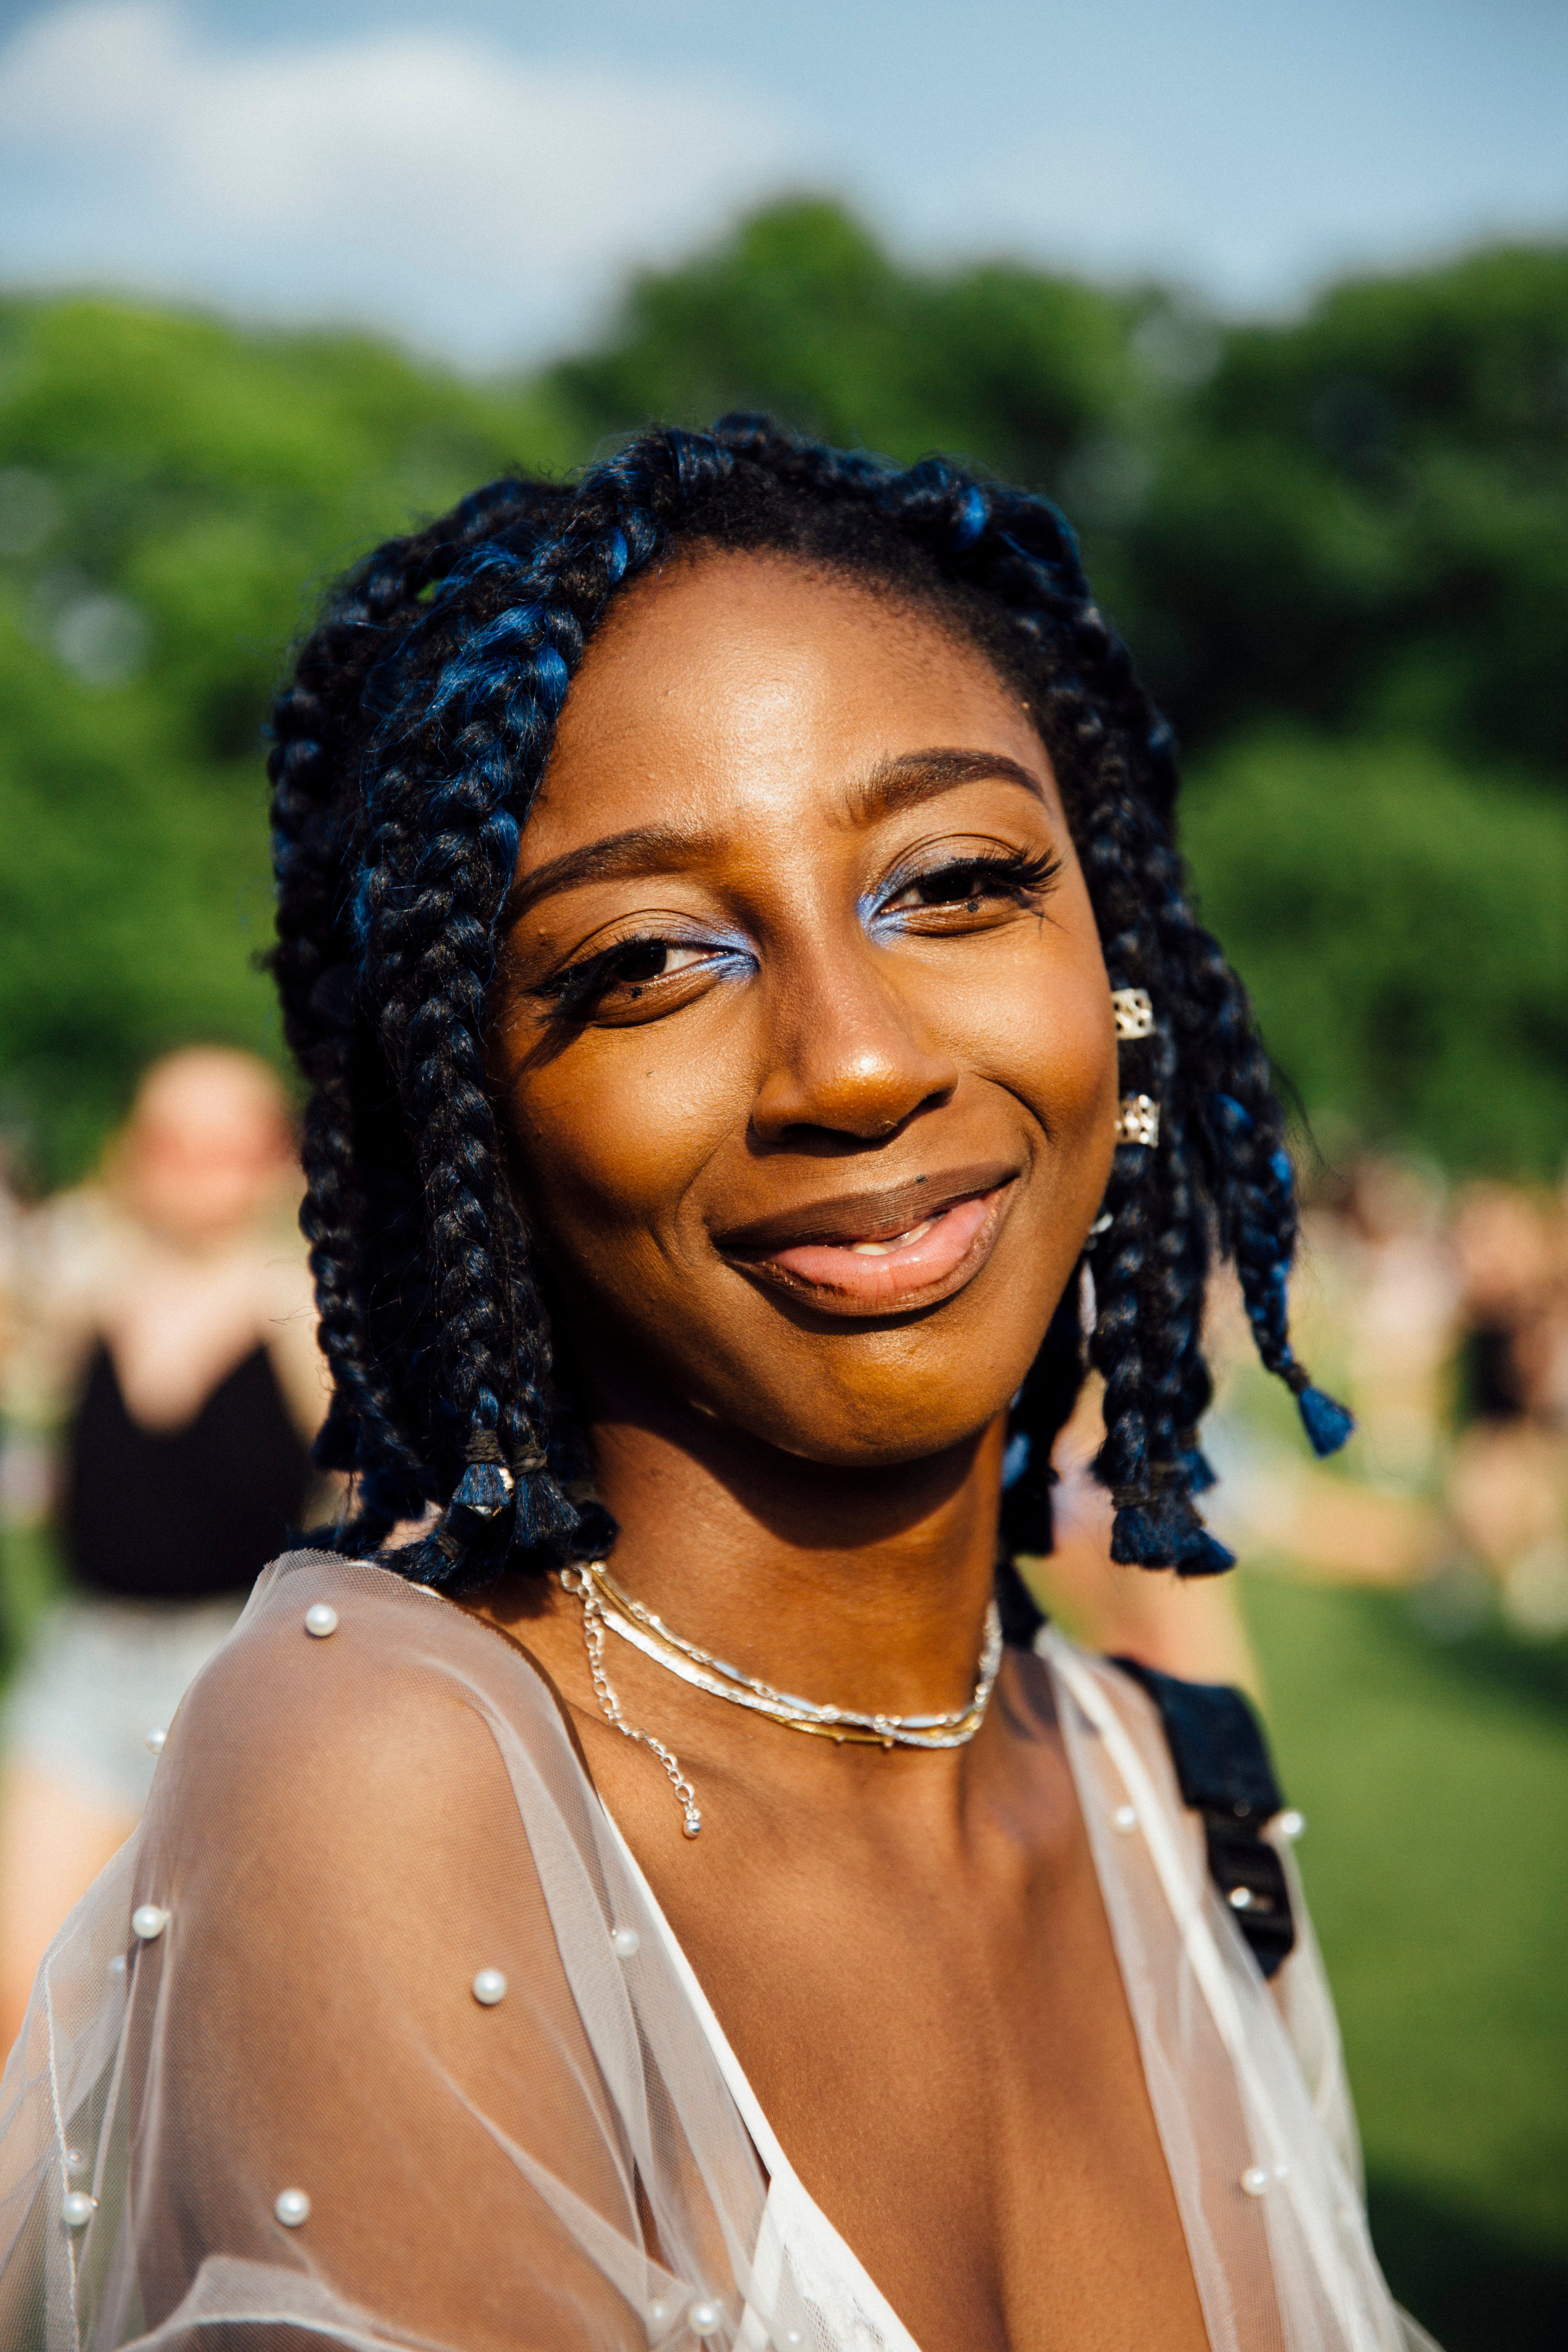 The Best Of Beauty From The 2019 Governor's Ball